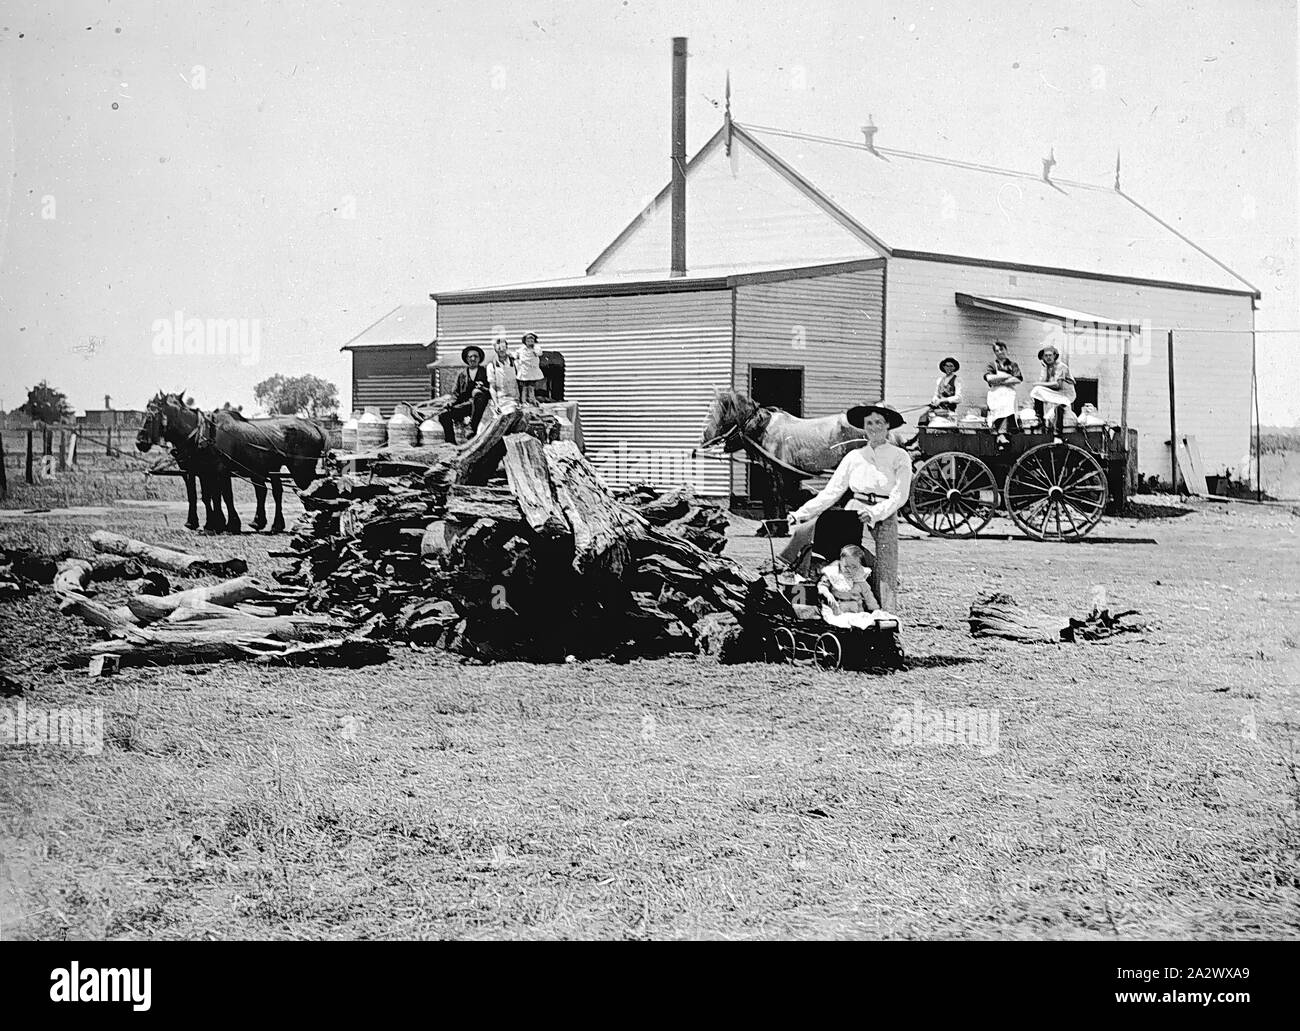 Negative - Farmers Delivering Milk, Emu Flat, Victoria, 1893, Farmers  delivering milk to the factory and then their children to school. There are  two wagons carrying milk cans in the background and,